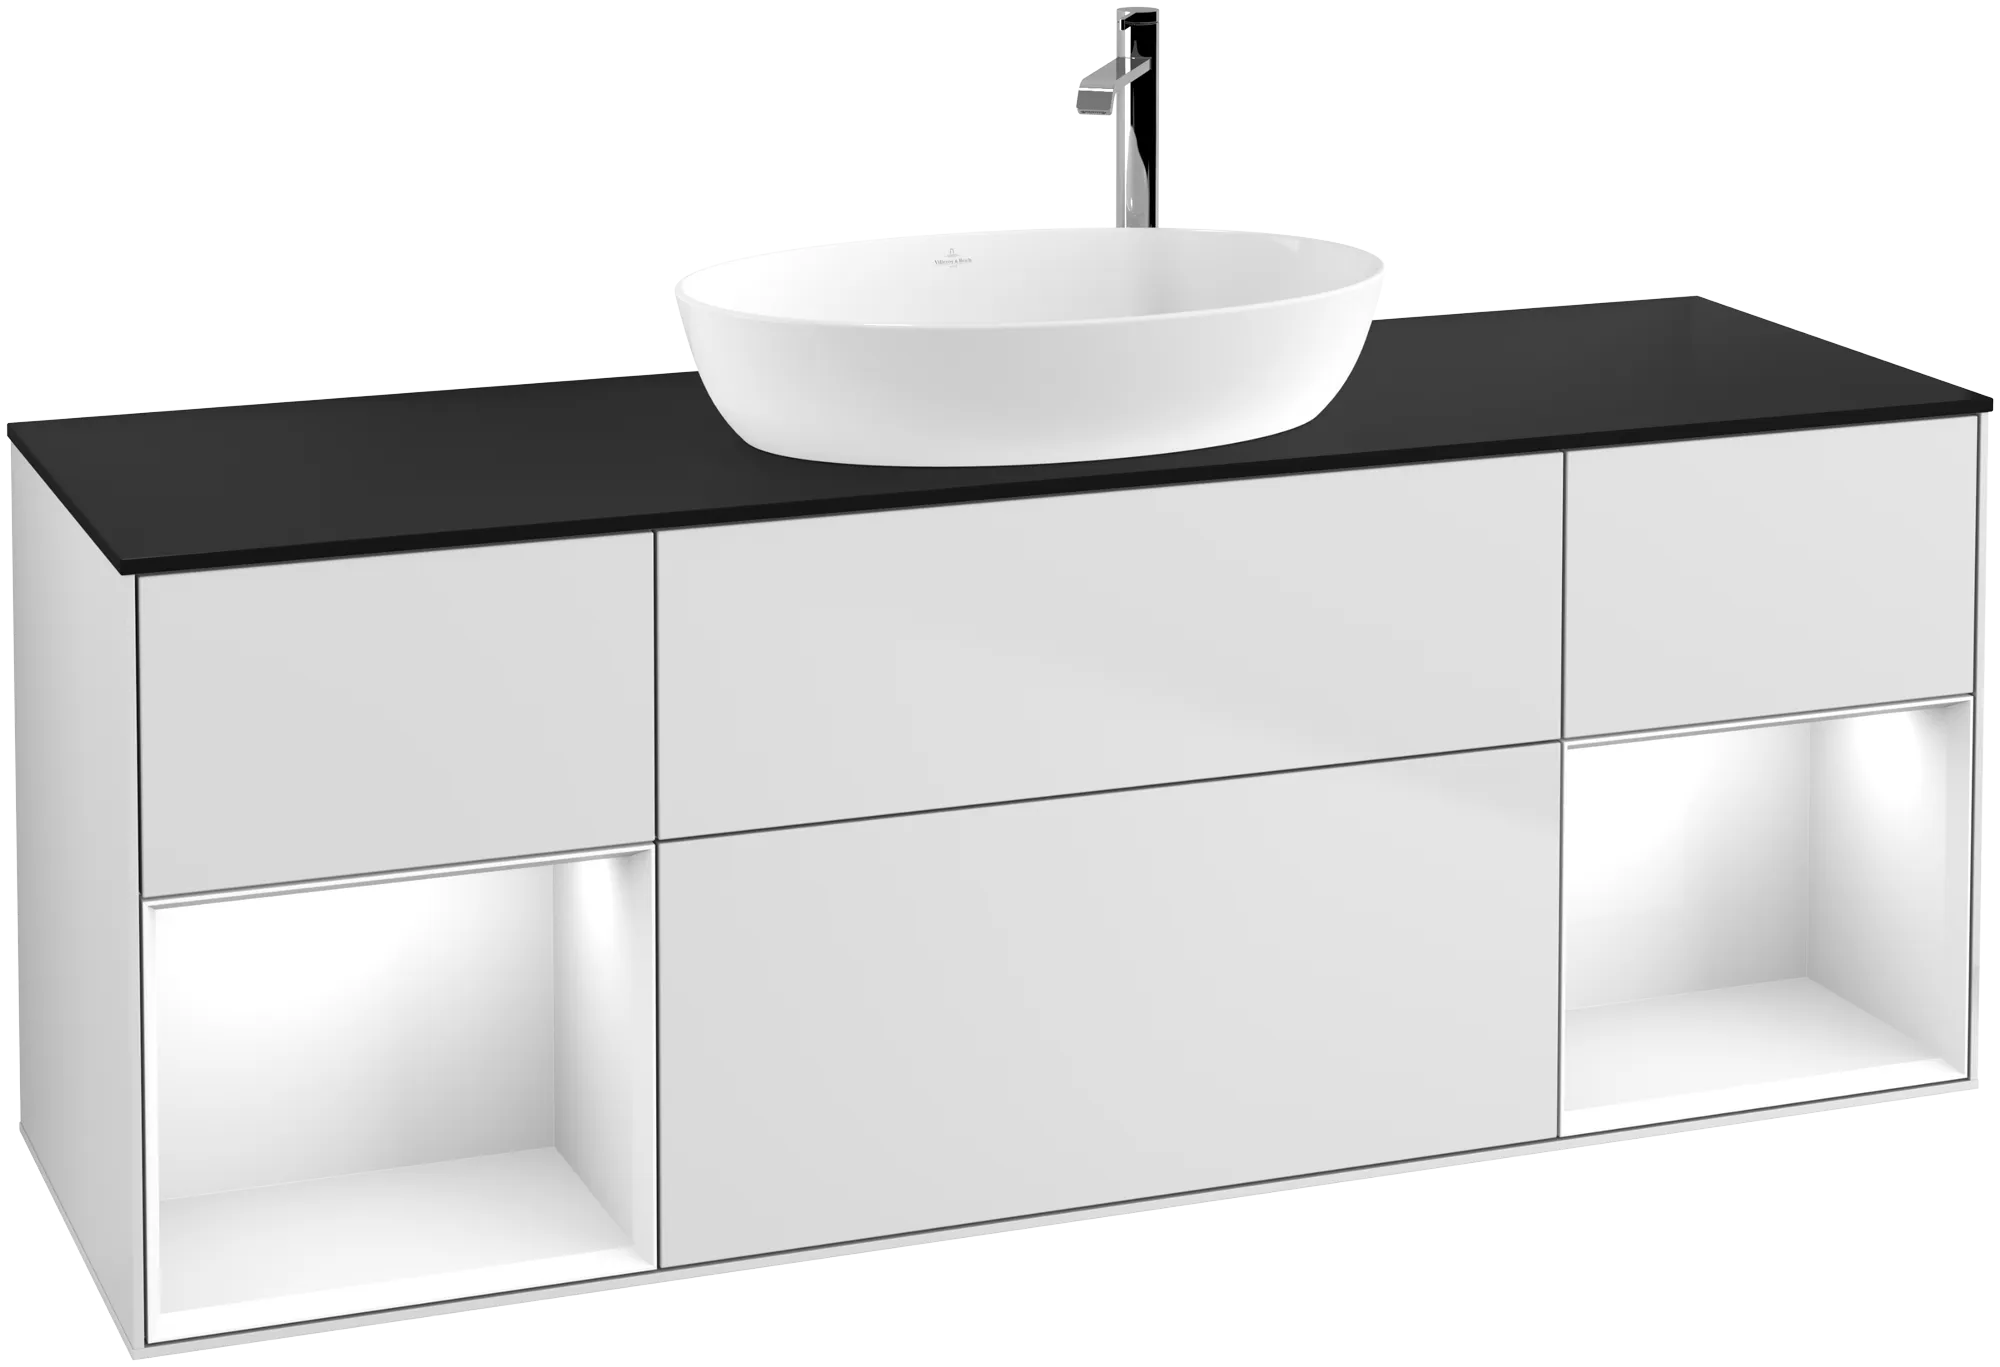 VILLEROY BOCH Finion Vanity unit, with lighting, 4 pull-out compartments, 1600 x 603 x 501 mm, White Matt Lacquer / Glossy White Lacquer / Glass Black Matt #G982GFMT resmi